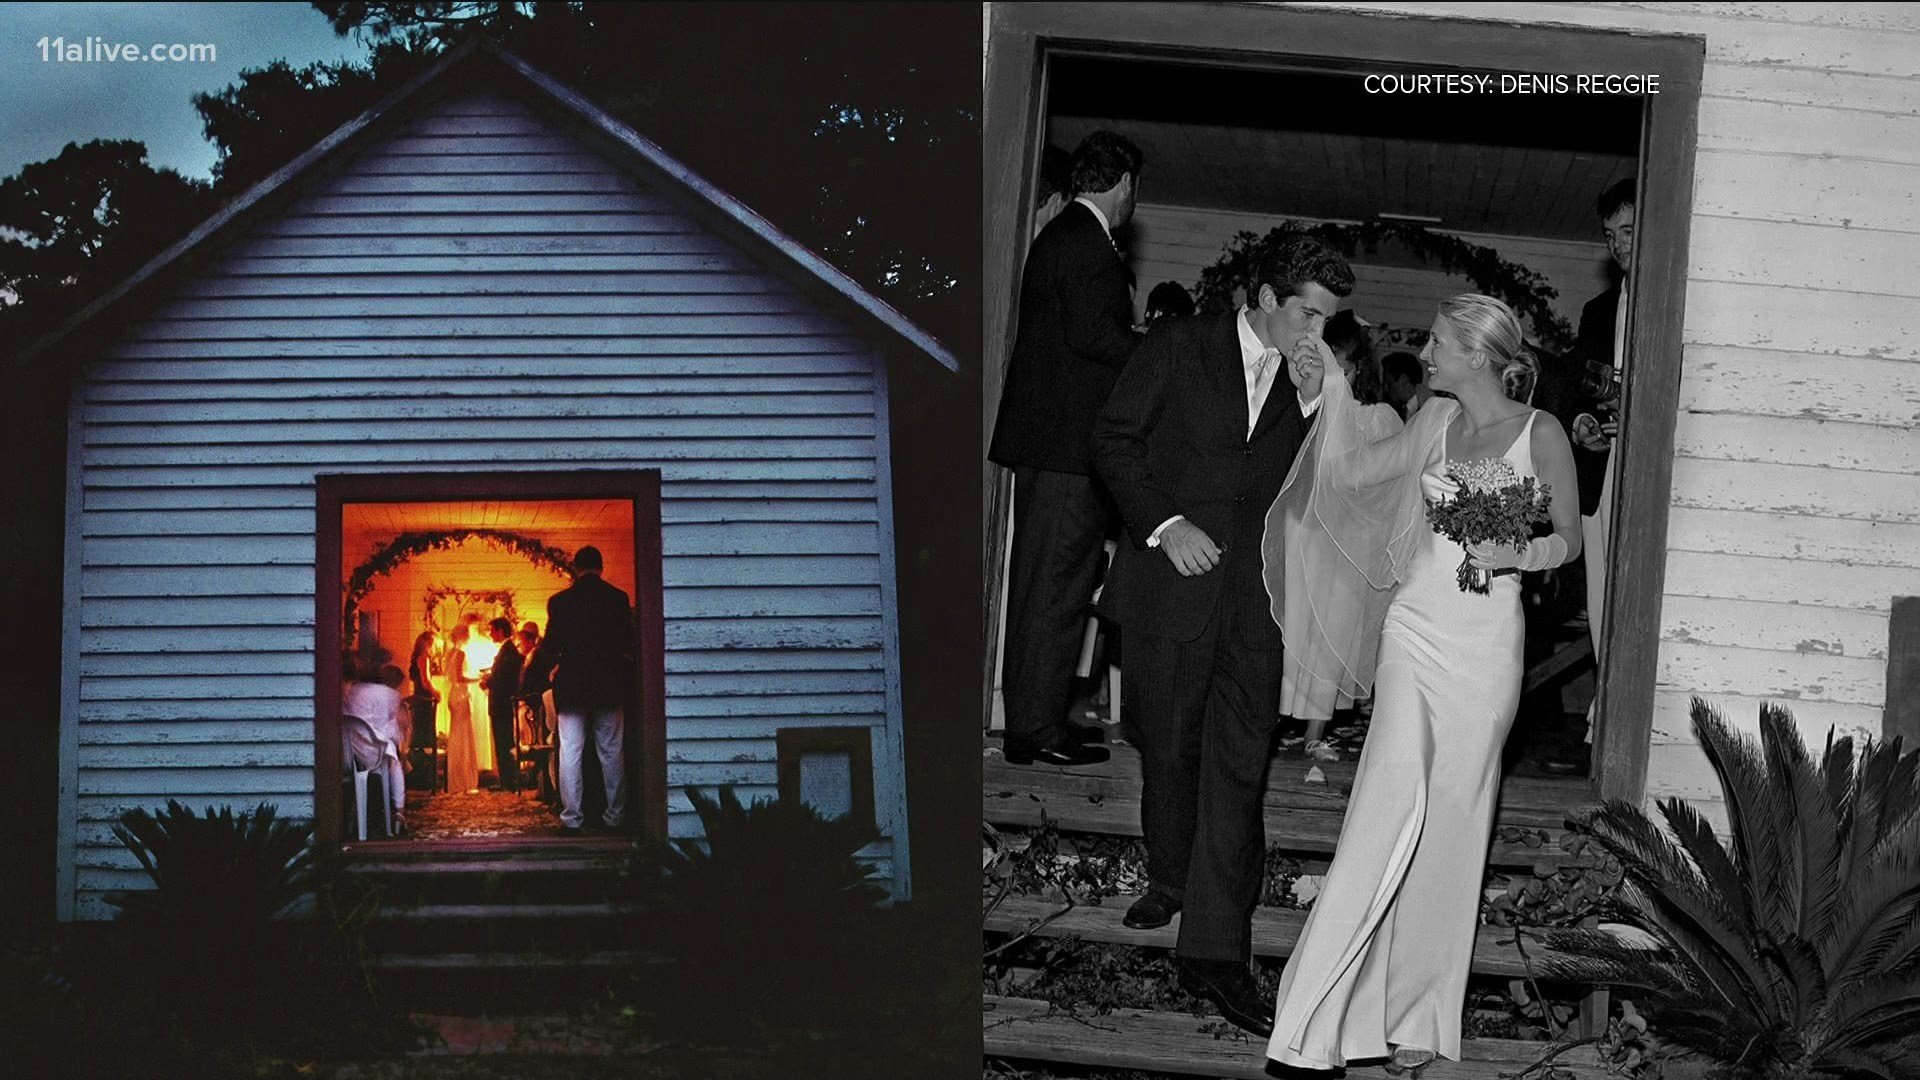 His photos of the wedding of JFK Jr. and Carolyn Bessette on Cumberland Island transformed how the world saw wedding photography.